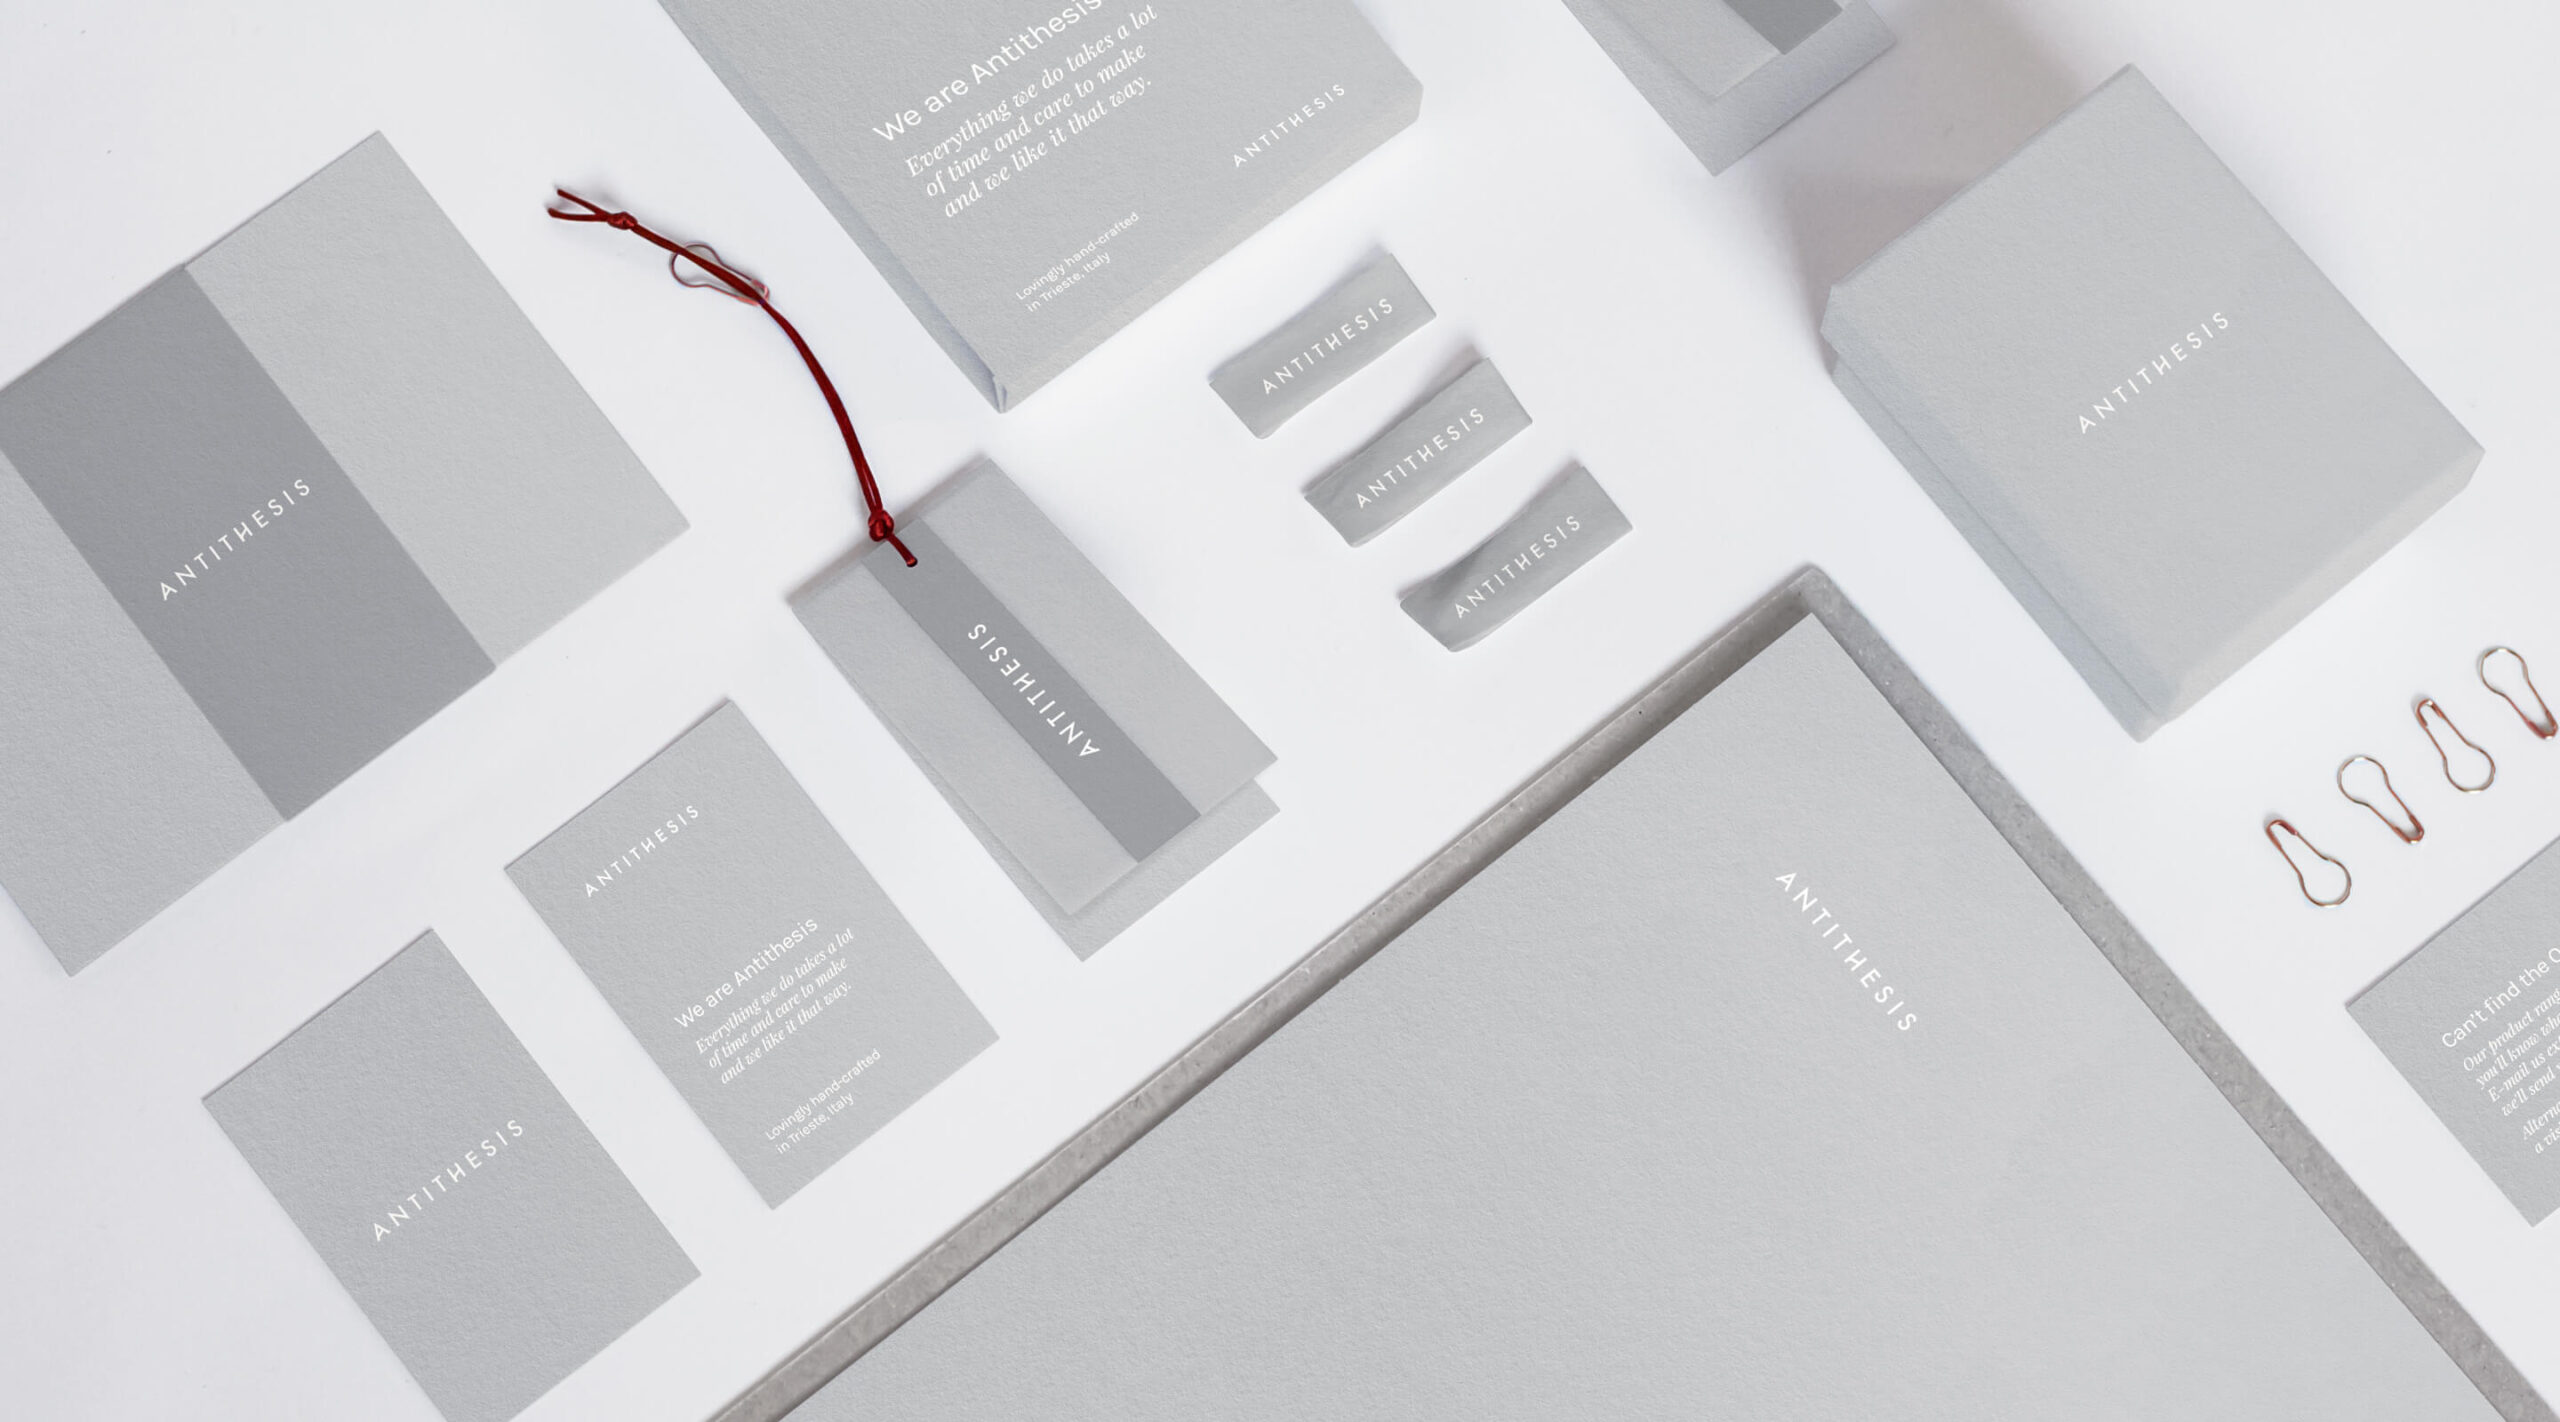 Overview of brand identity design featuring business cards, labels, swing tags, packaging and other printed collateral